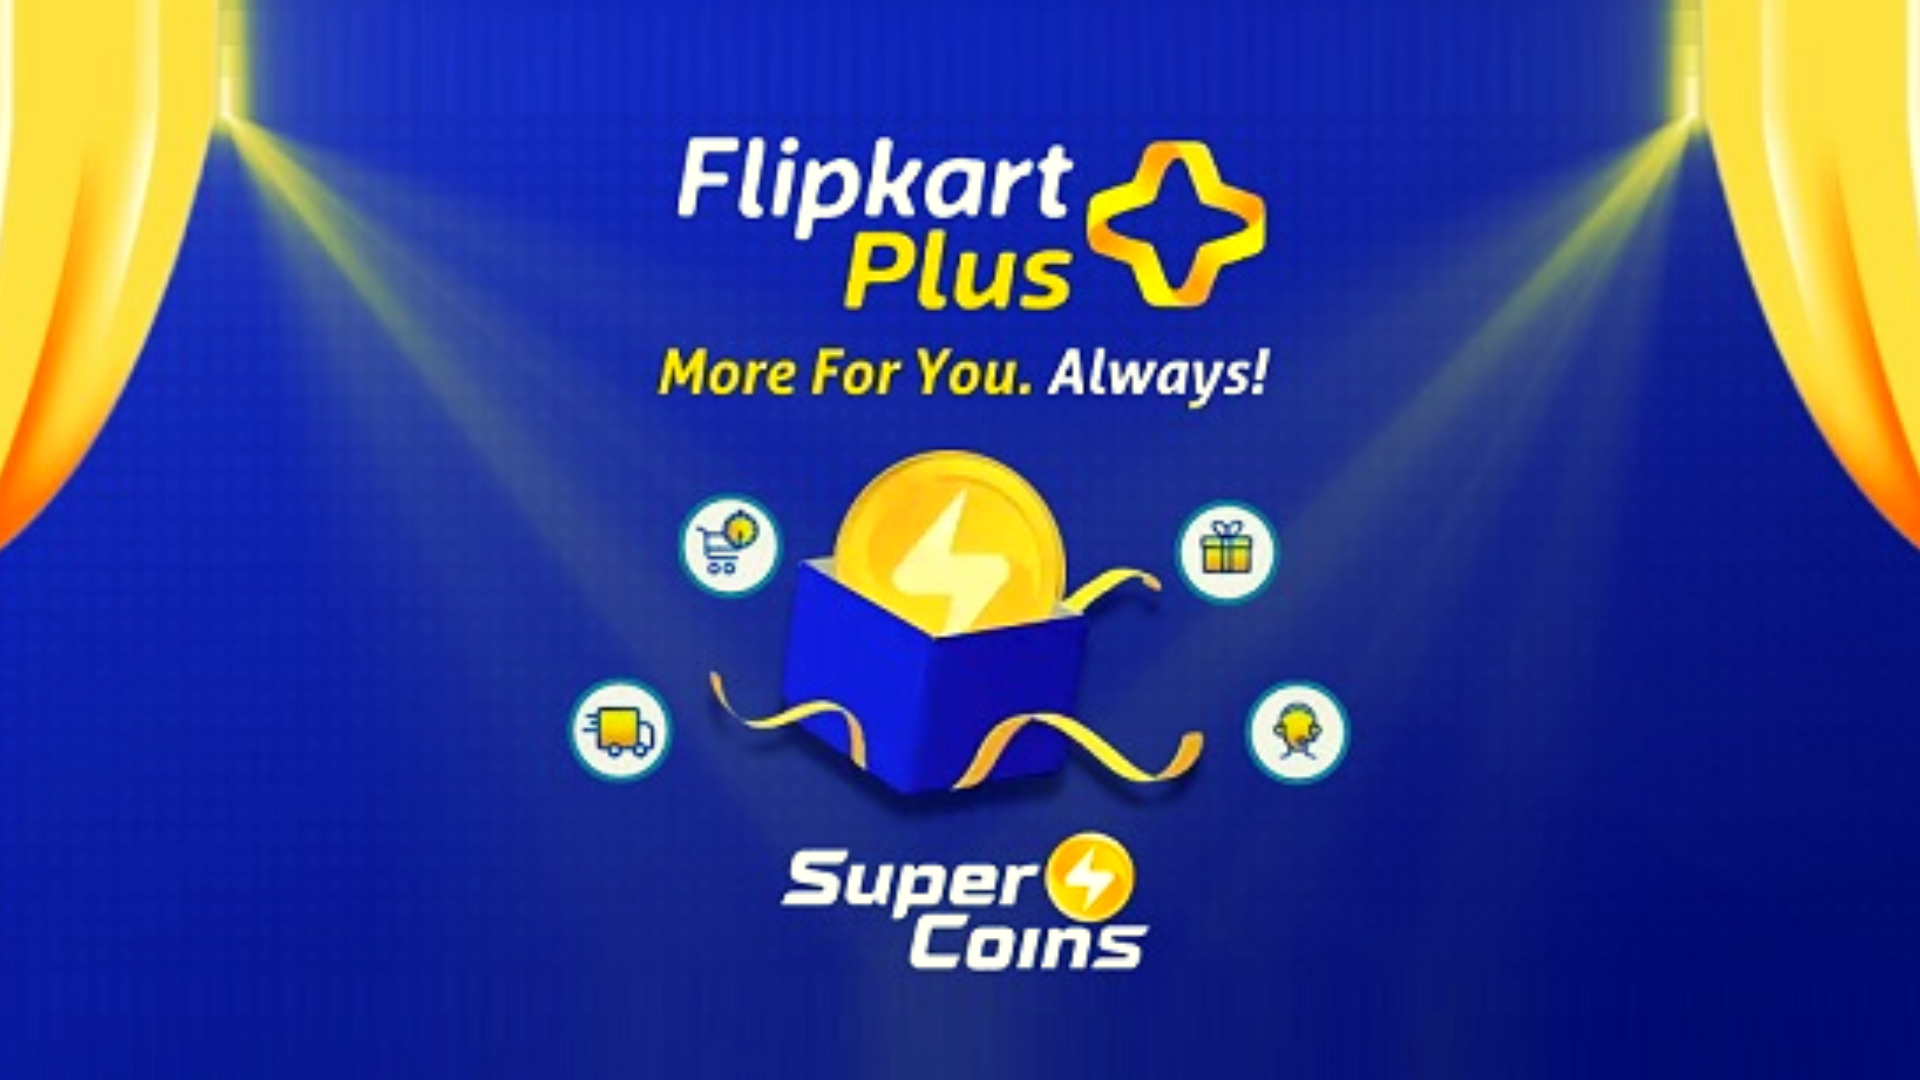 How To Use Supercoins In Flipkart: Pro Tips For Getting Rewards